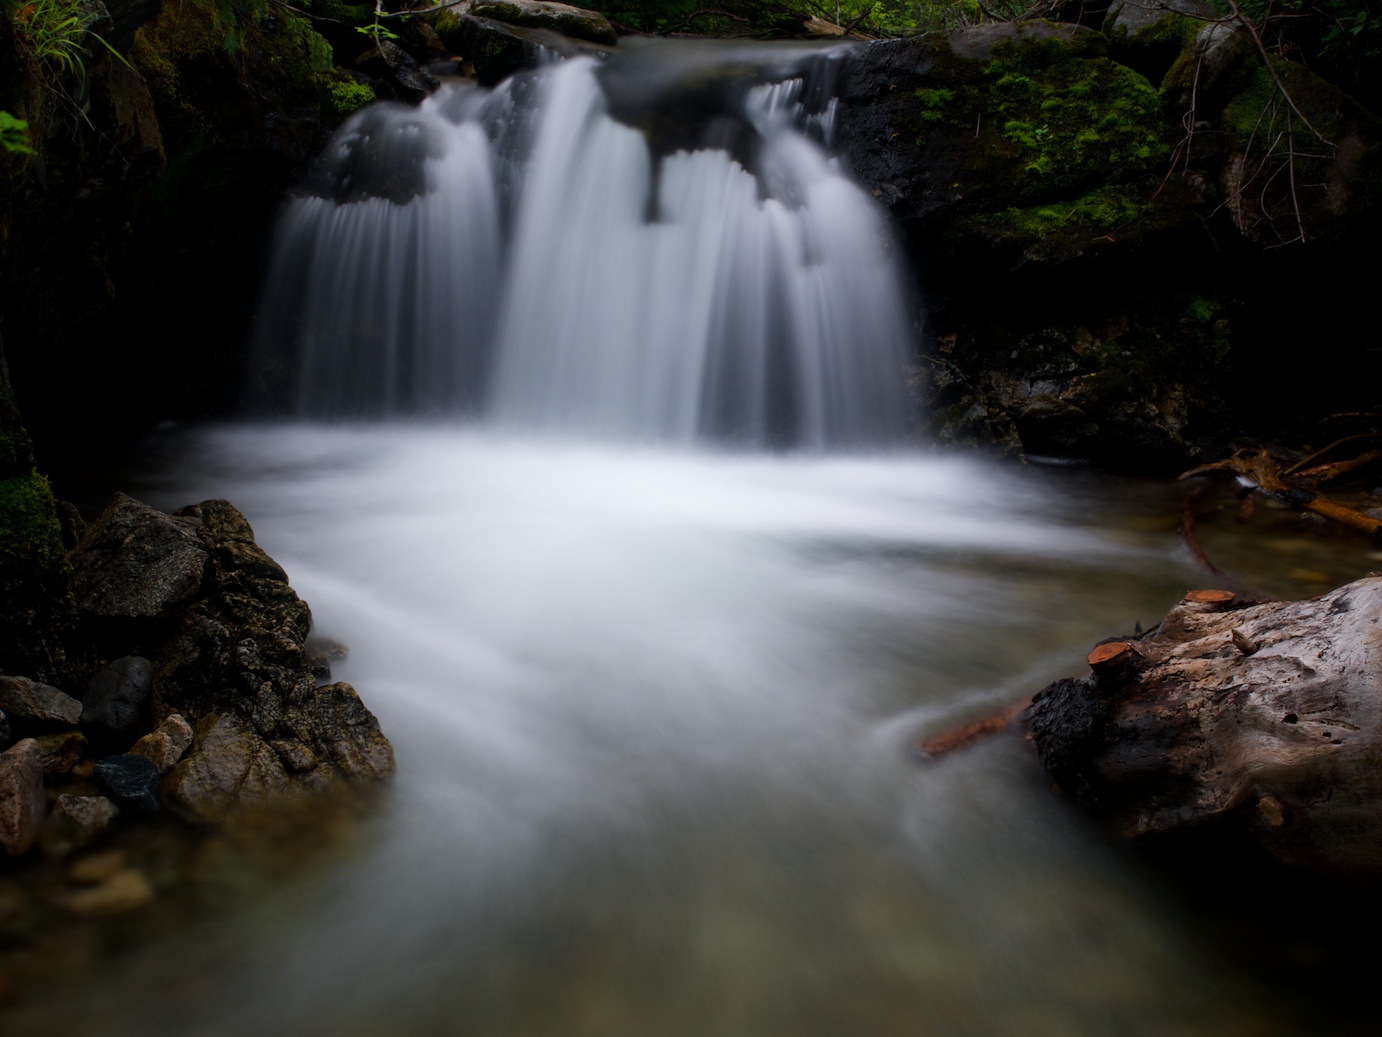 F/22, 5 seconds, ISO 100 on a tripod, at 21mm - and a ProMaster Variable ND filter.